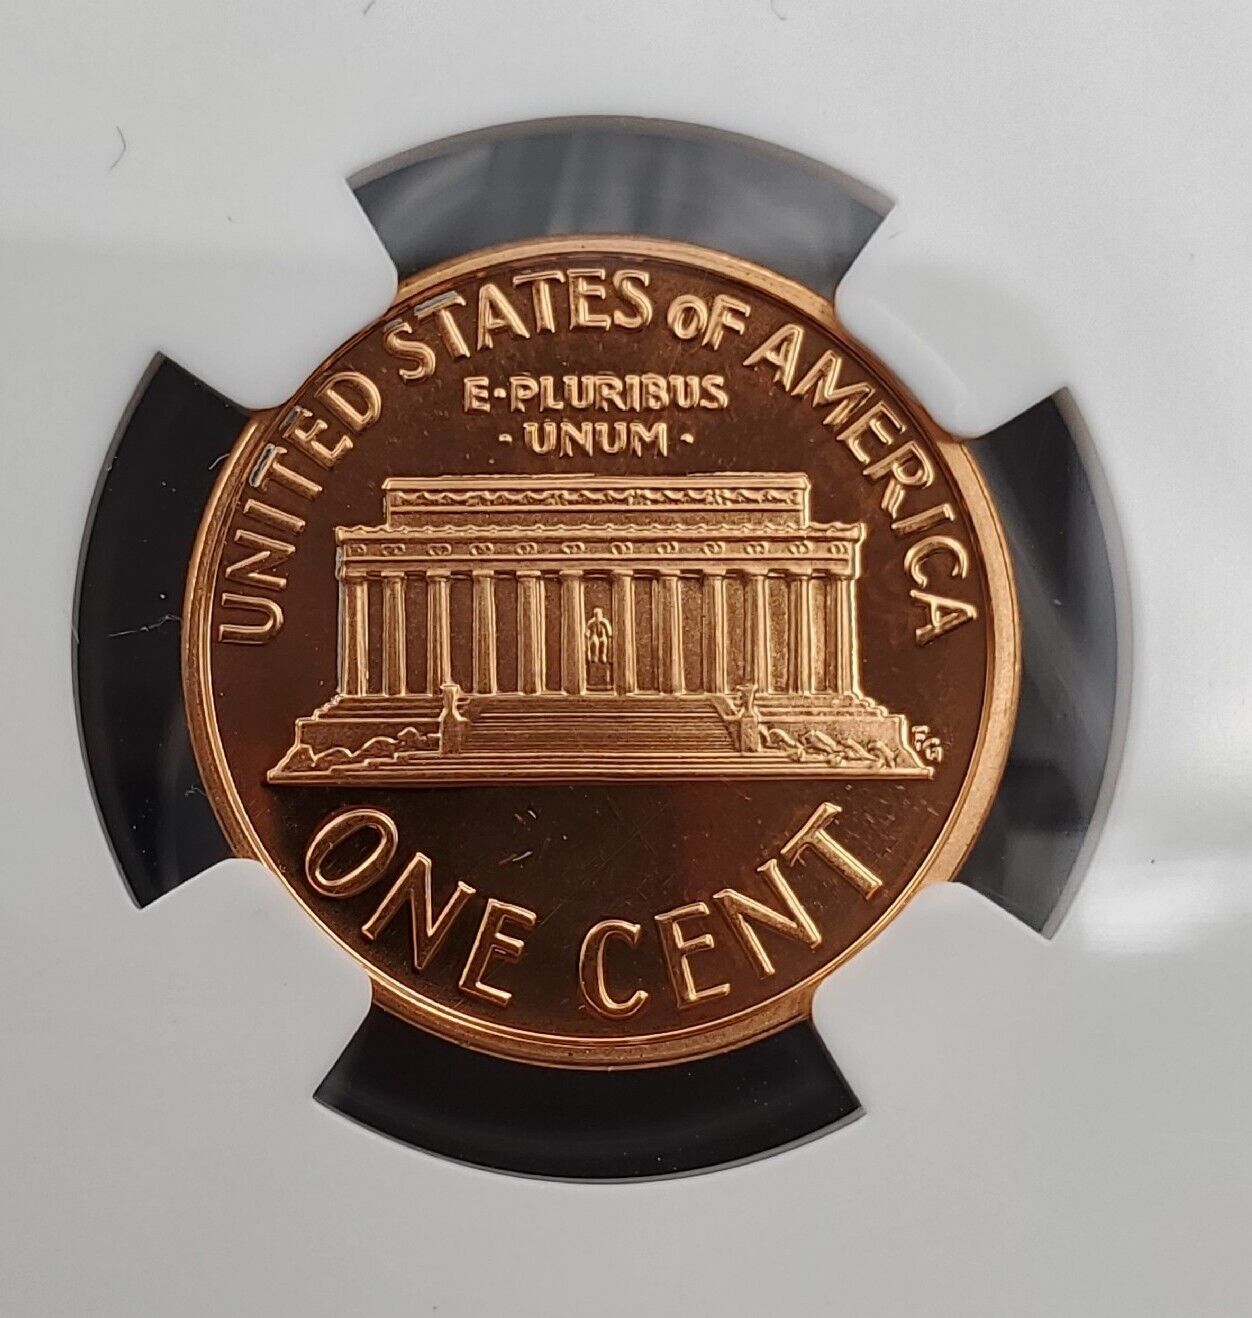 2001 S Lincoln Memorial Cent Penny coin 1c PF69 RD NGC Ultra Cameo UCAM